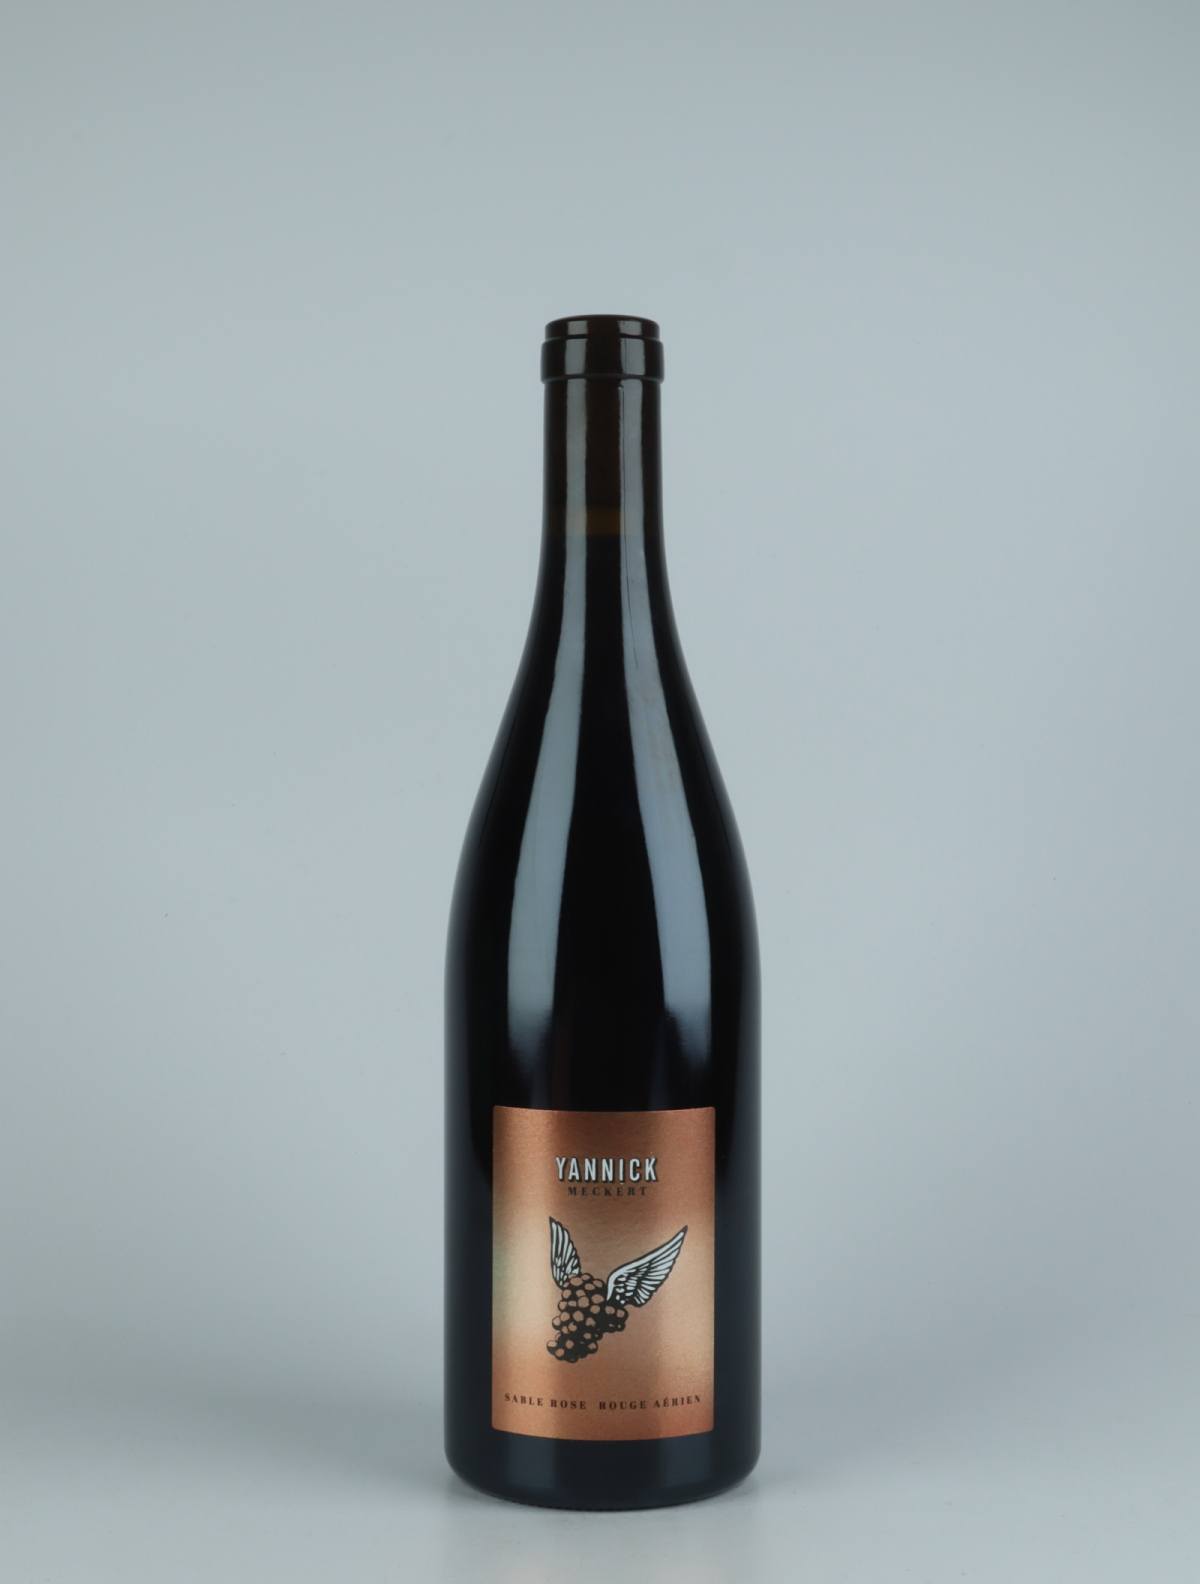 A bottle 2020 Pinot Noir - Sable Rose Rouge Aérien Red wine from Yannick Meckert, Alsace in France